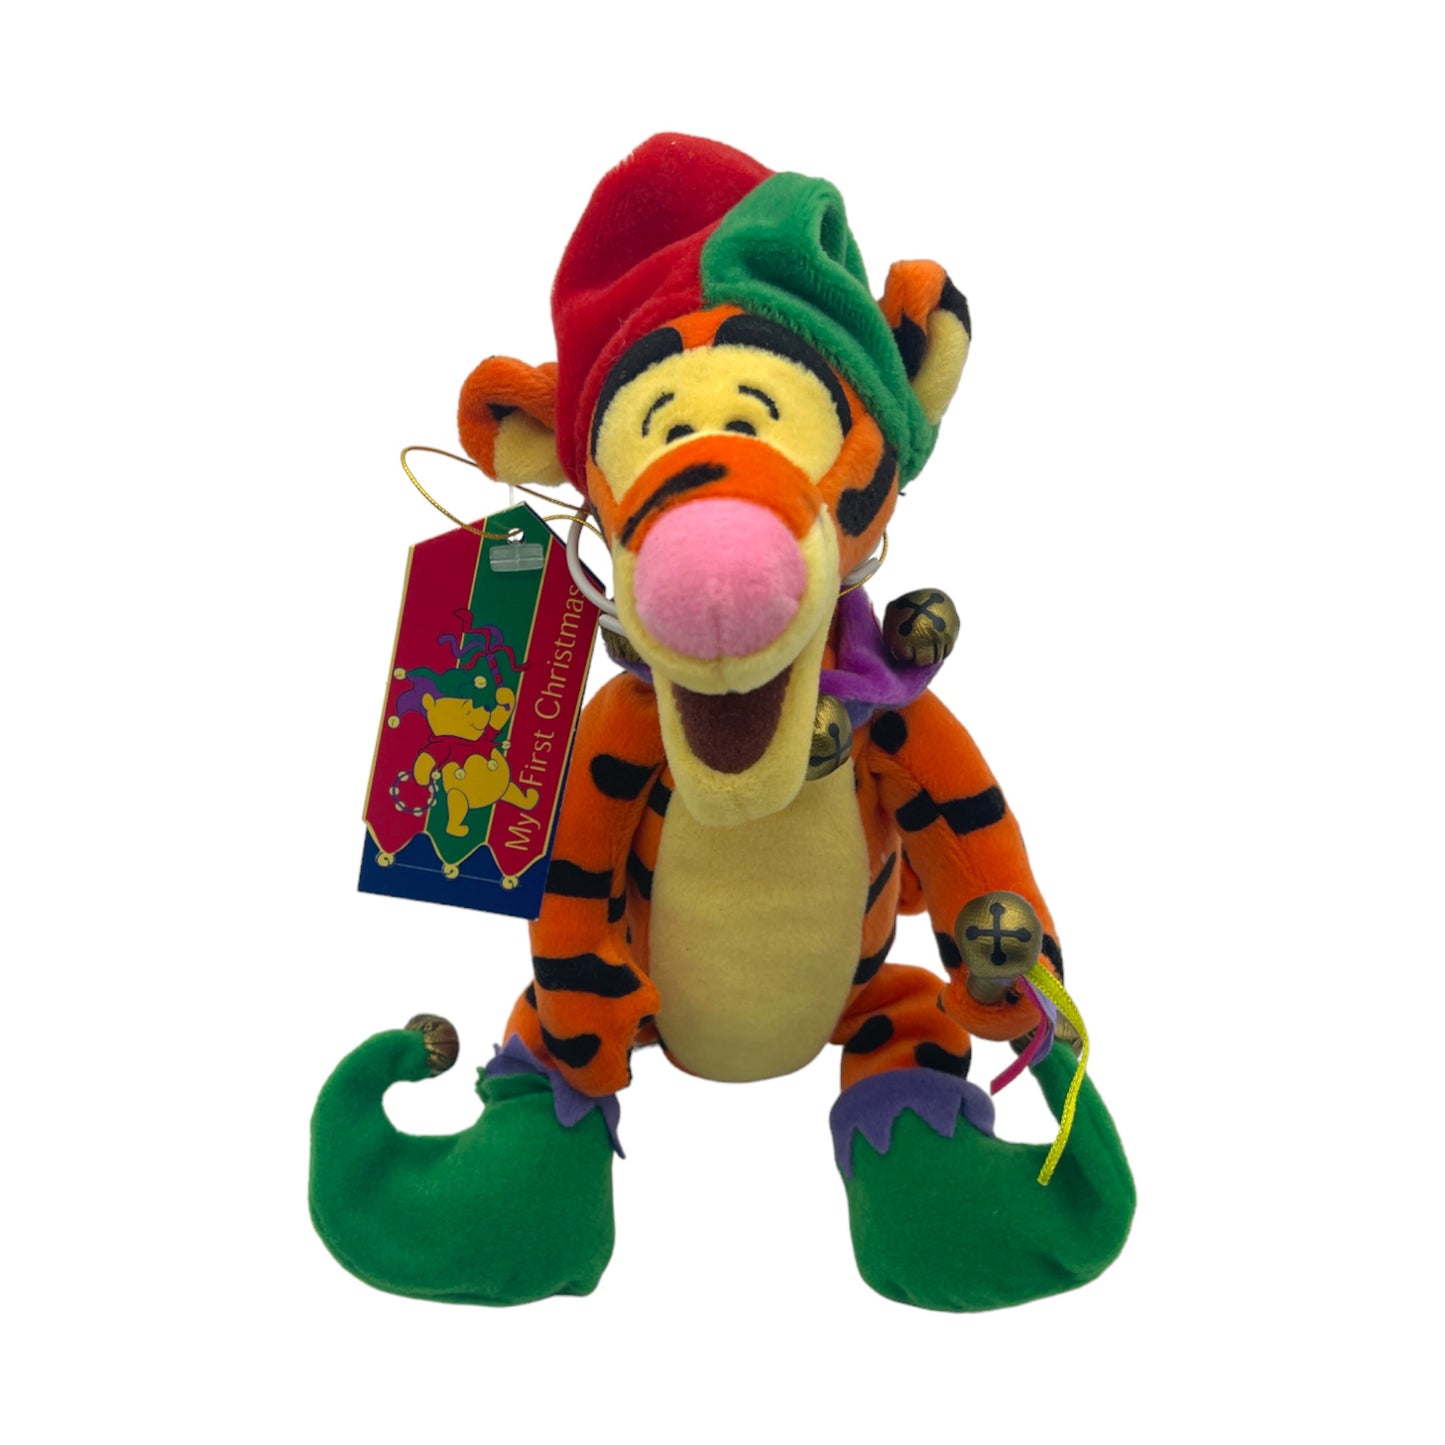 Disney Store London - Jester Tigger - My First Christmas - With Tags - Vintage - 9"